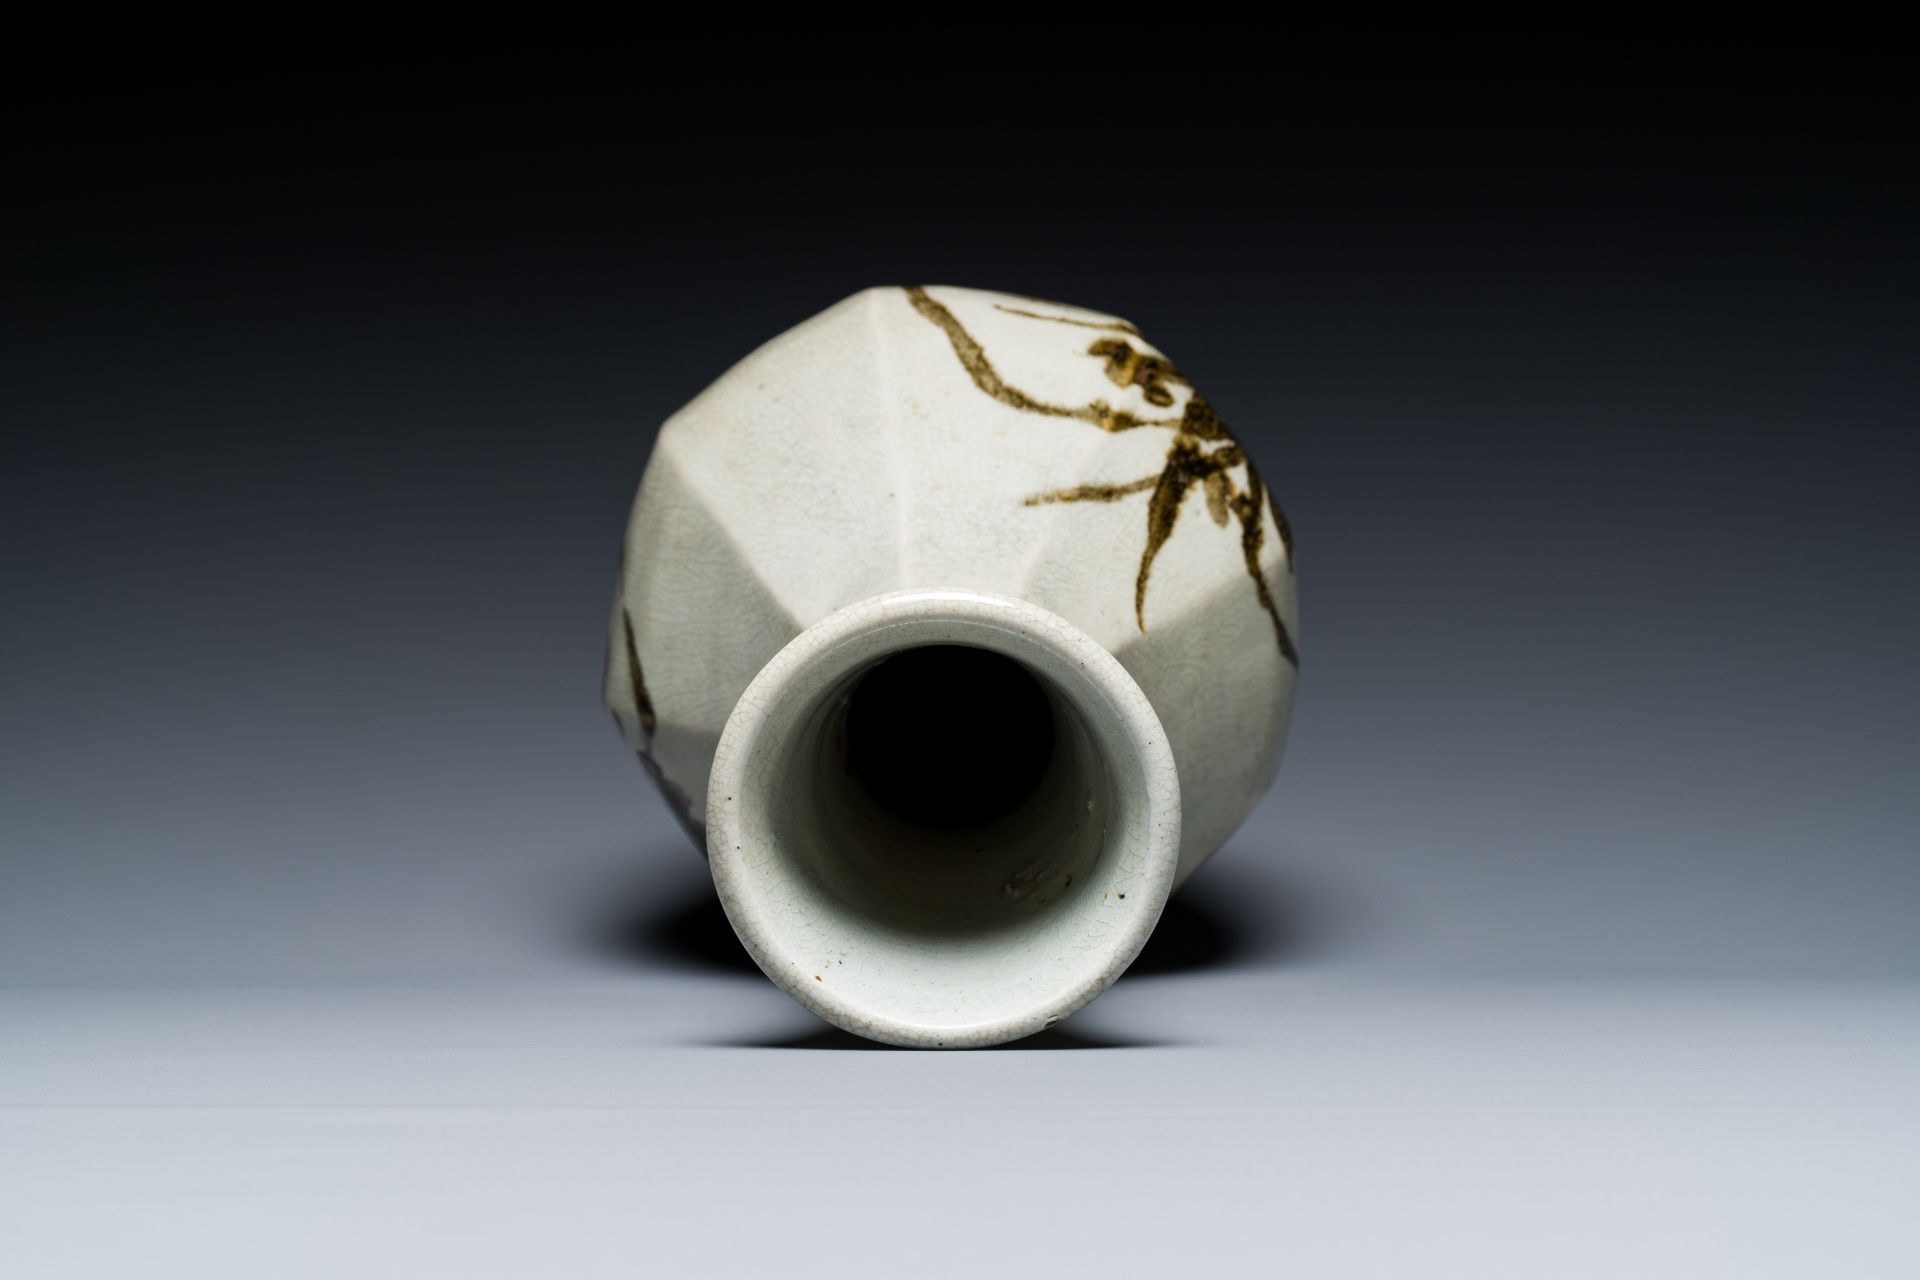 A Korean bottle vase with floral design, Joseon dynasty, 16th C. - Image 5 of 6